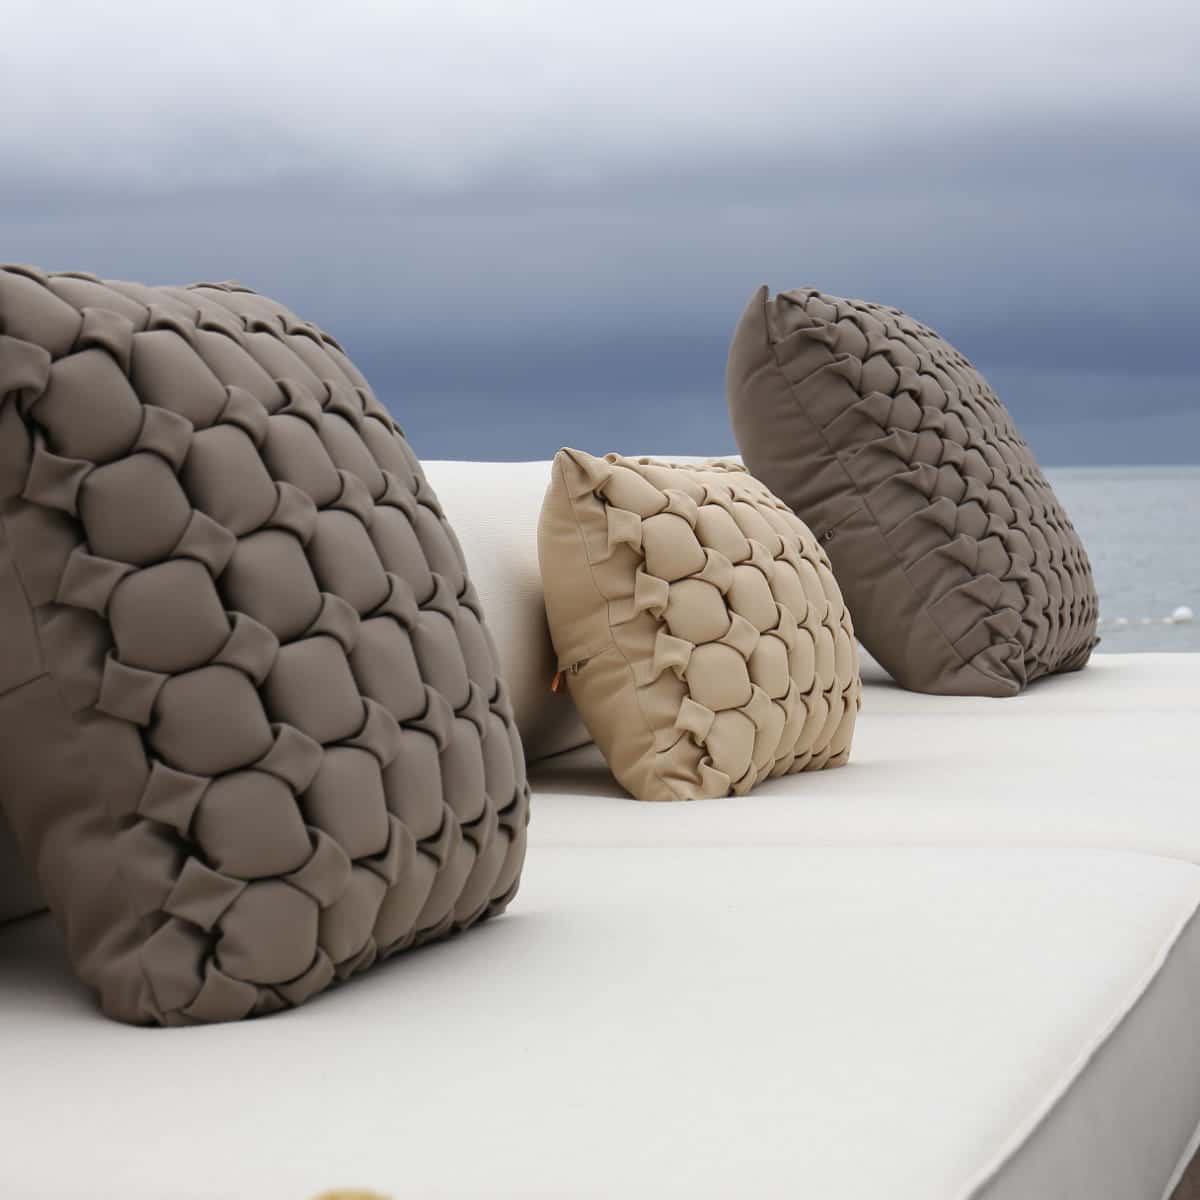 Patio Furniture Accessories & Accents - Pillows